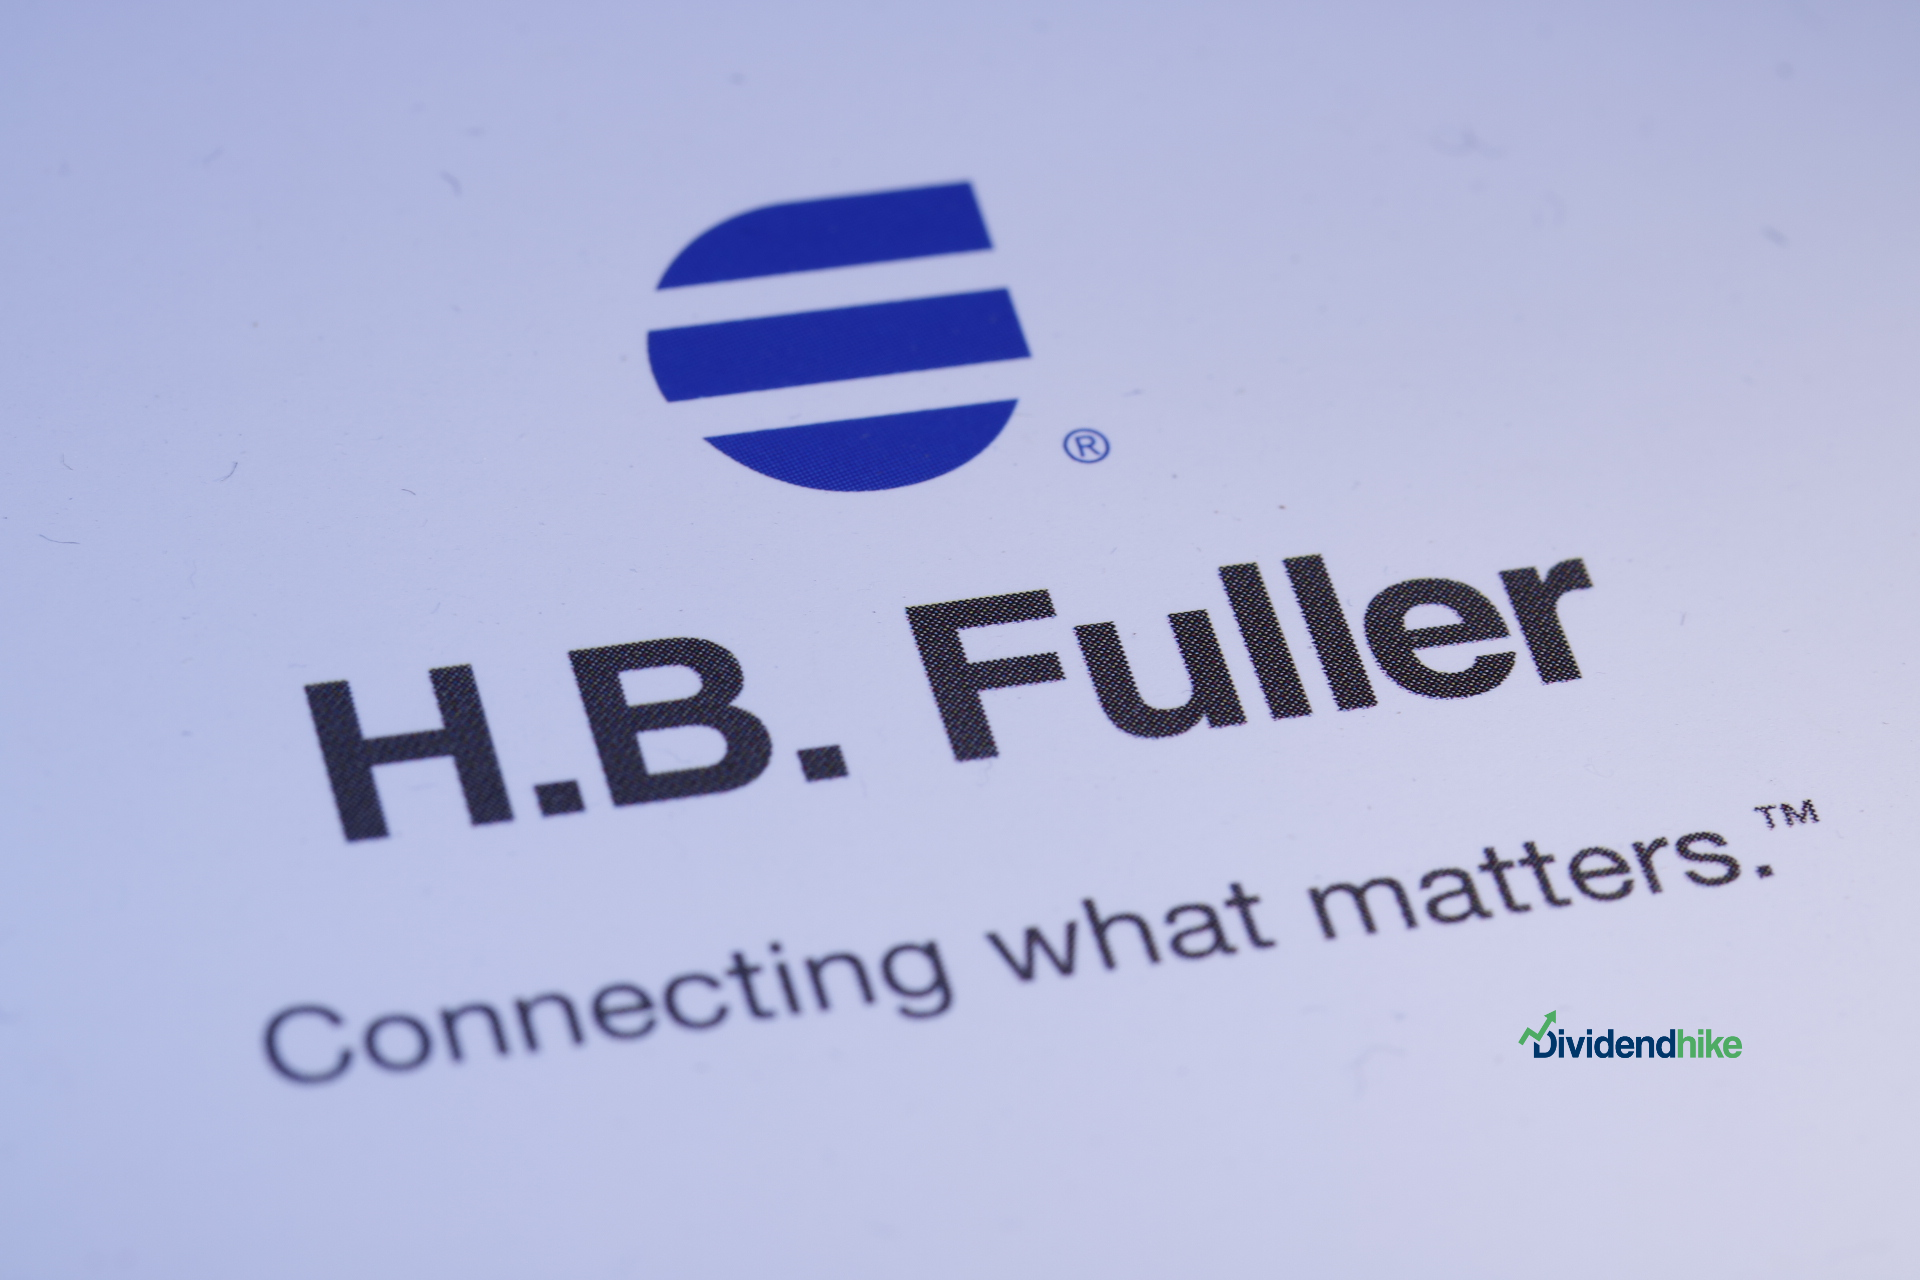 H.B. Fuller hikes dividend by 17.6%